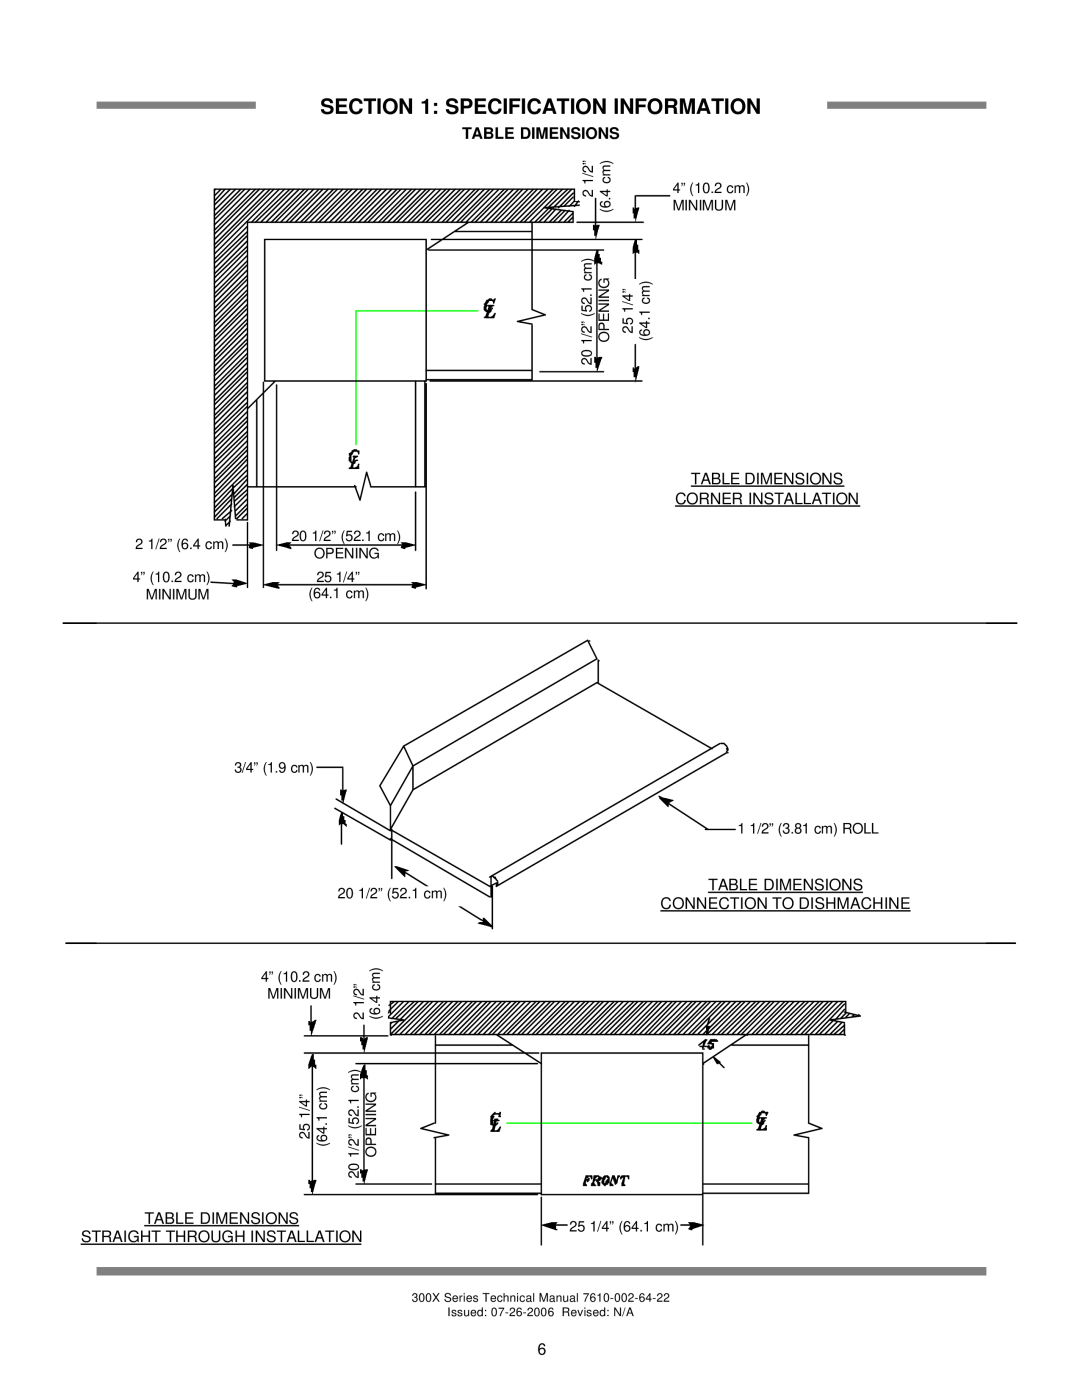 Jackson 300XS, 300XLT Specification Information, Corner Installation, Table Dimensions Connection To Dishmachine 